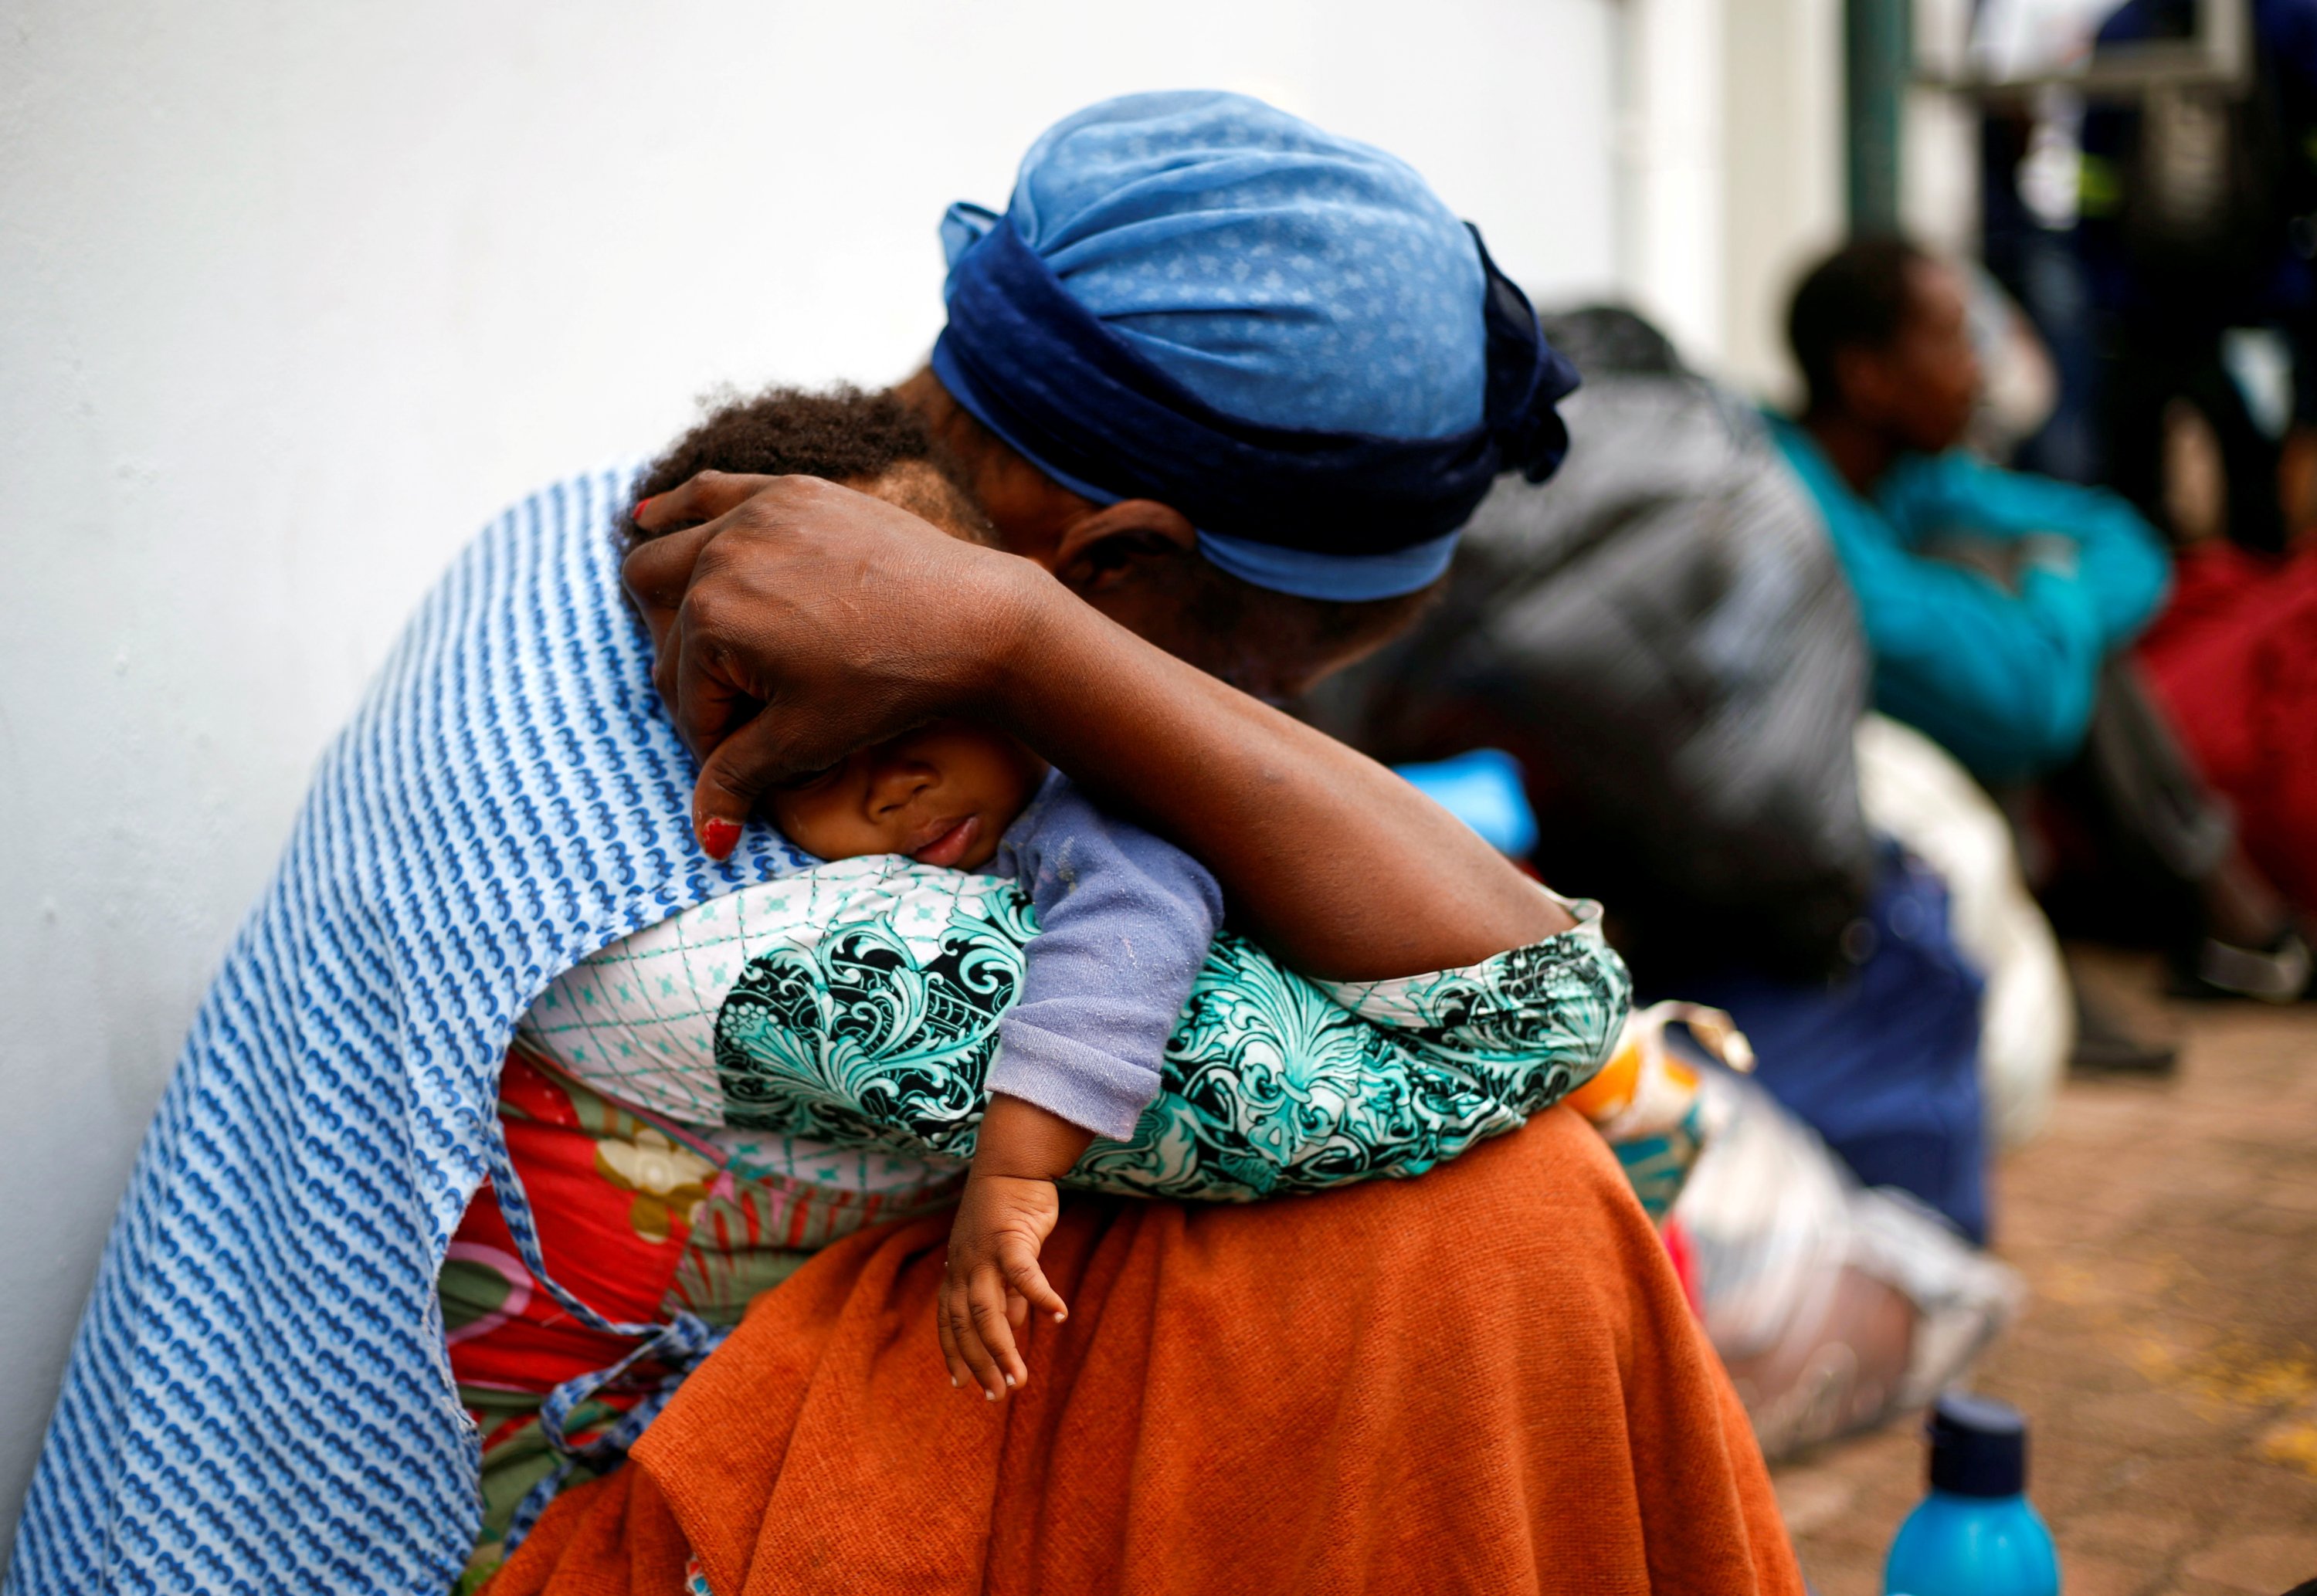 A homeless woman puts her baby to sleep as they queue to be checked by health officials before heading to shelters, during a nationwide 21 day lockdown in Durban, South Africa, March 27, 2020. (REUTERS Photo)